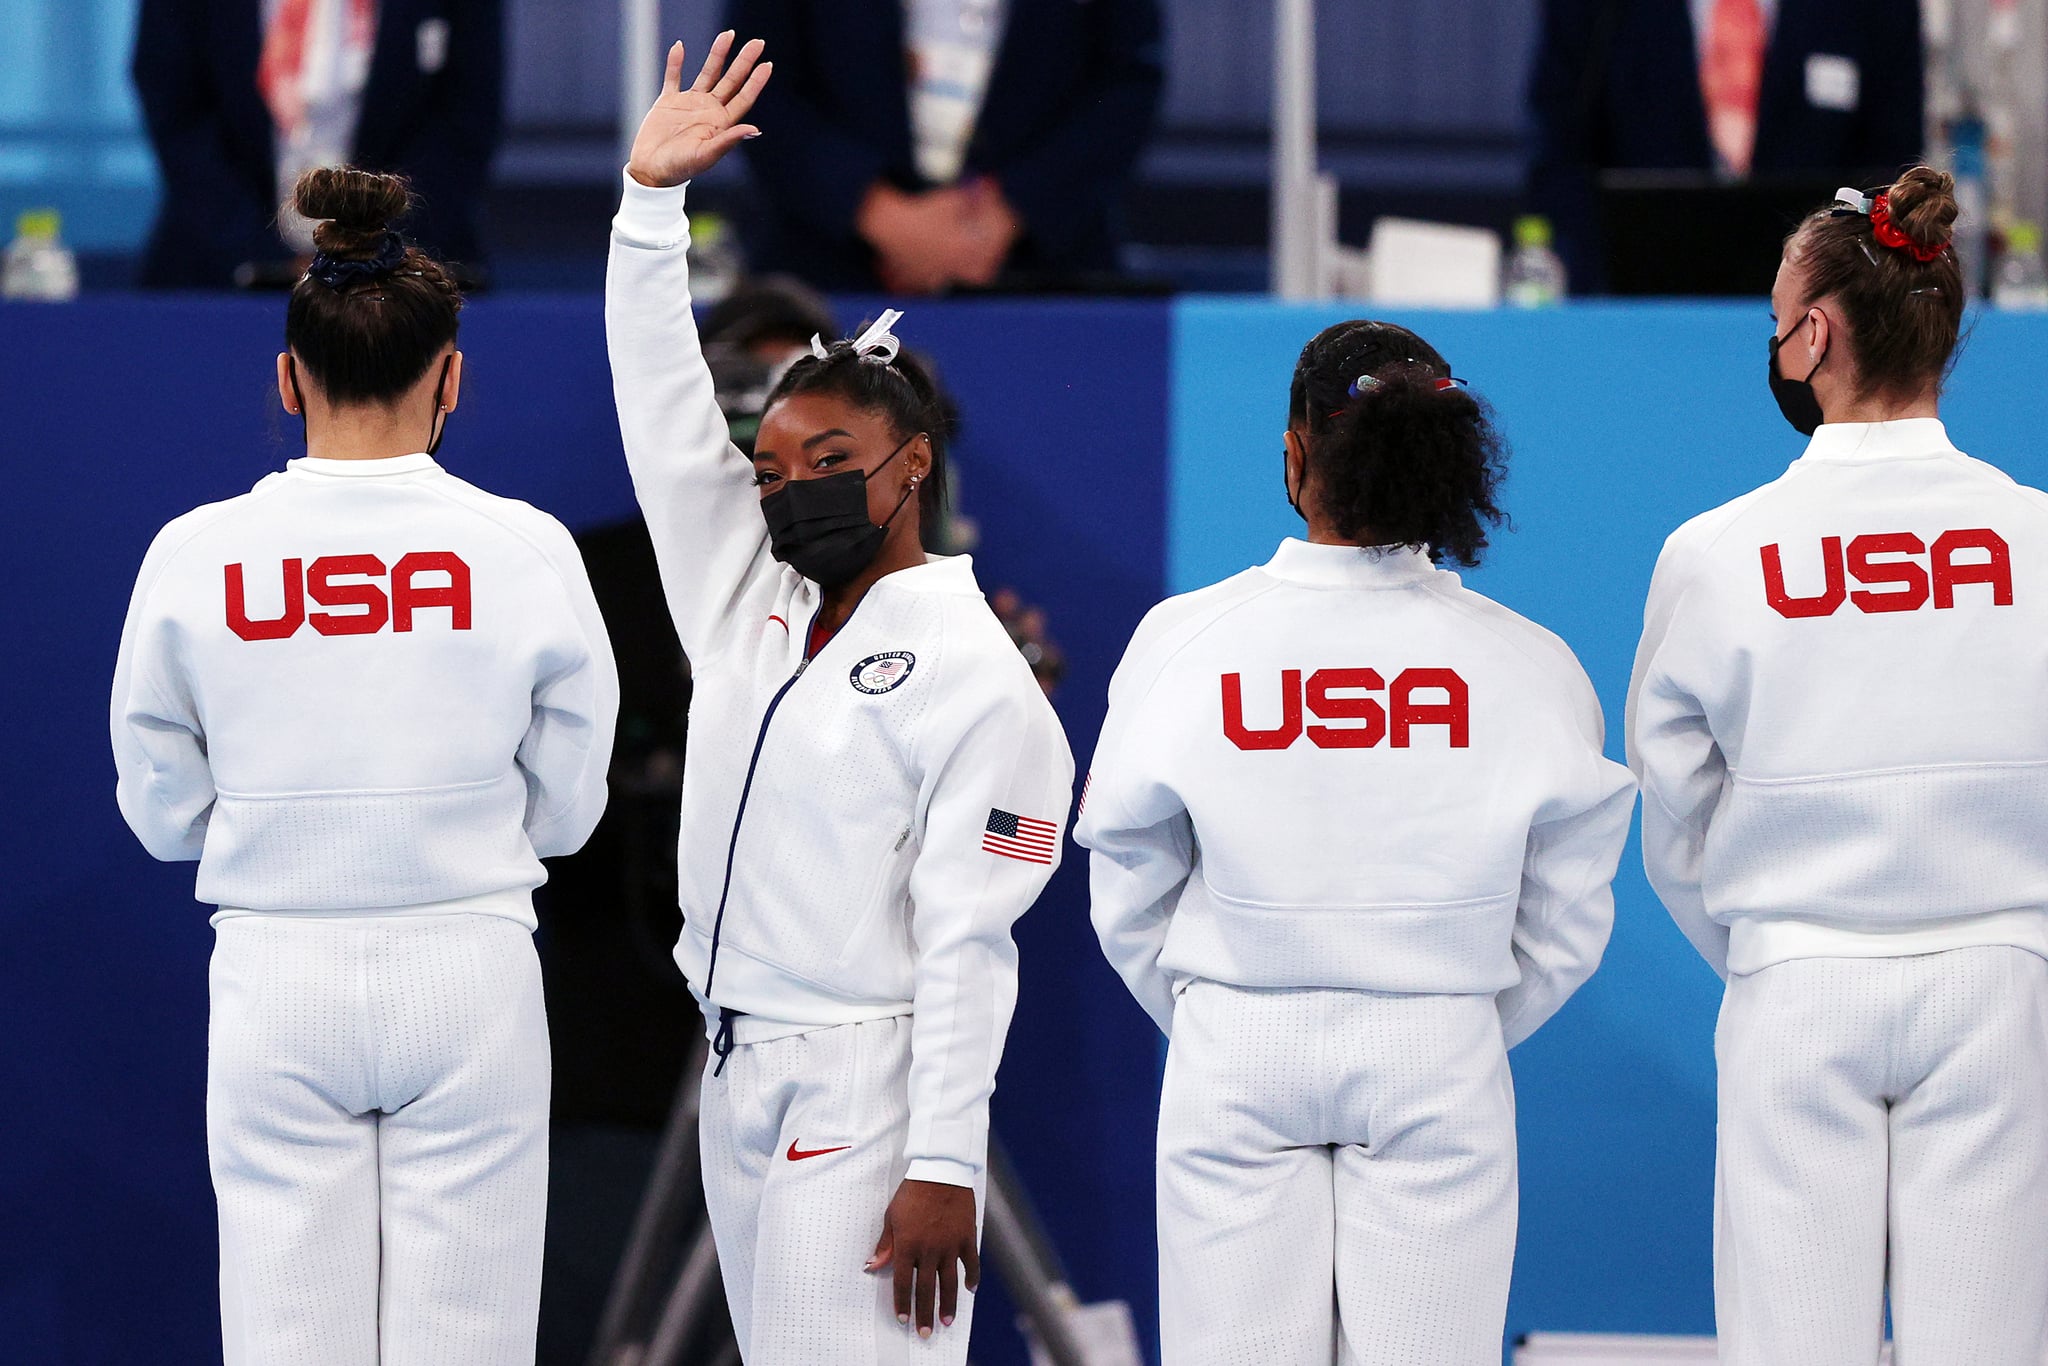 TOKYO, JAPAN - JULY 27: Simone Biles of Team USA waves to the crowd during introductions prior to the Women's Team Final on day four of the Tokyo 2020 Olympic Games at Ariake Gymnastics Centre on July 27, 2021 in Tokyo, Japan. (Photo by Ezra Shaw/Getty Images)